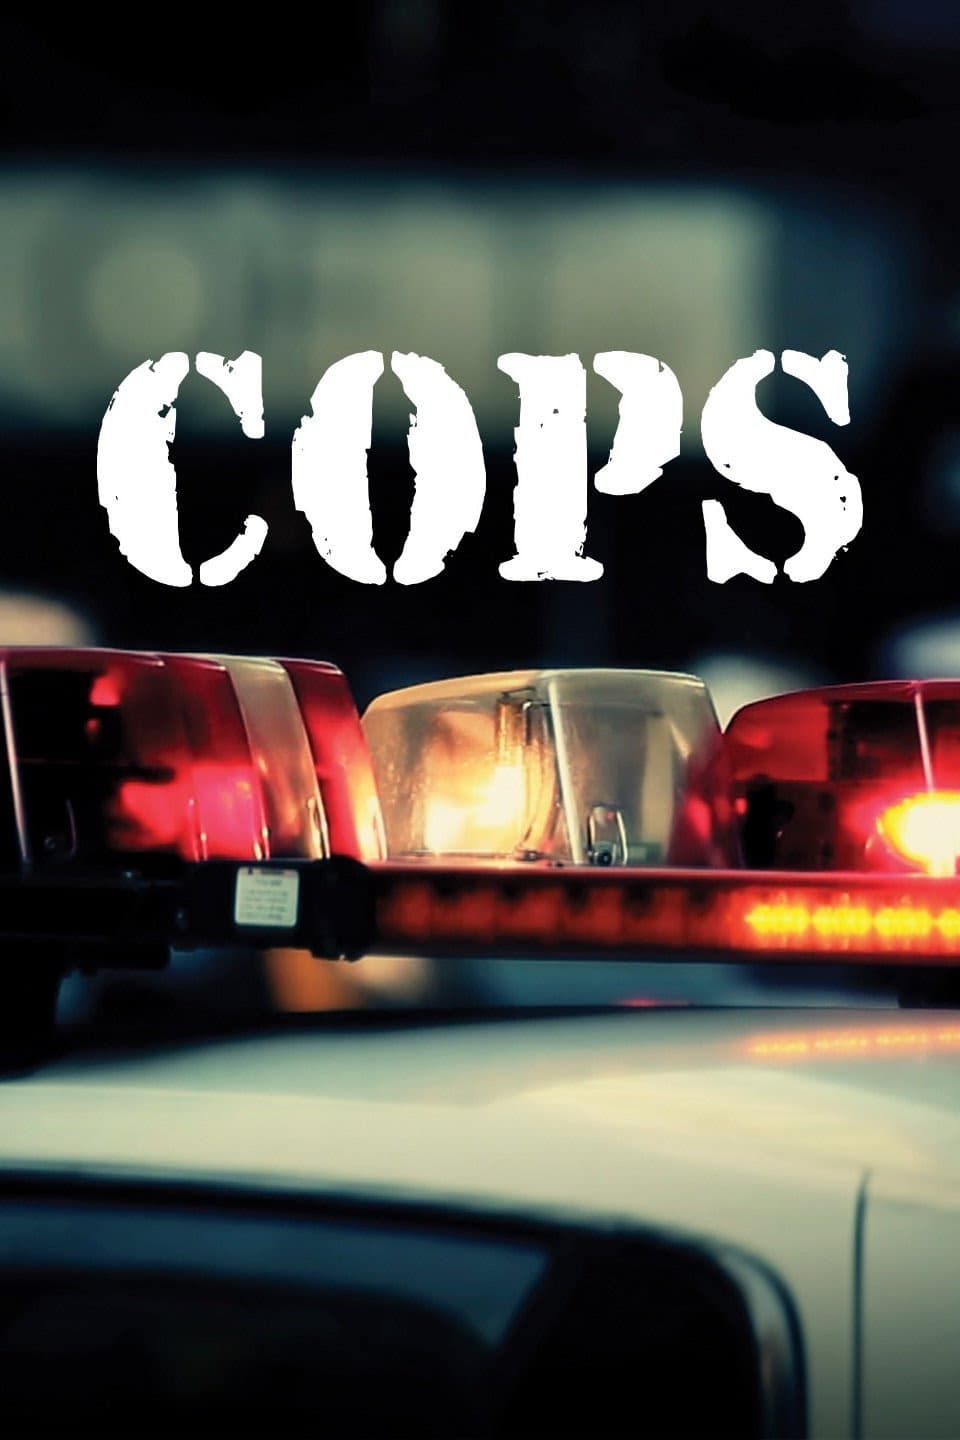 Inland LEOs to be featured on “COPS”